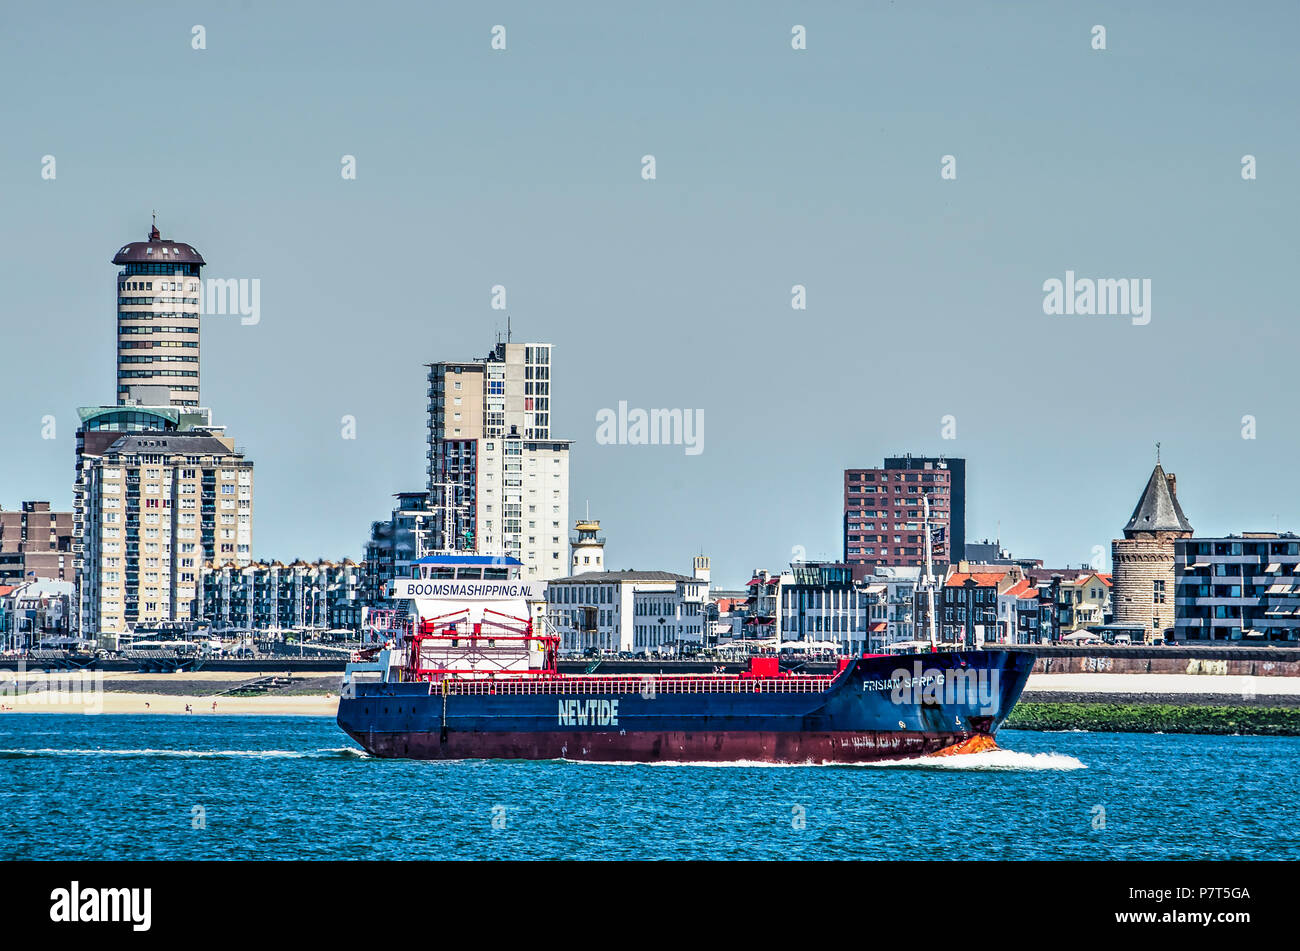 Vlissingen (Flushing), The Netherlands, July 2nd, 2018: Vessel on Western Scheldt estuaryon its way to Antwerp passing close to the seaside promenade Stock Photo